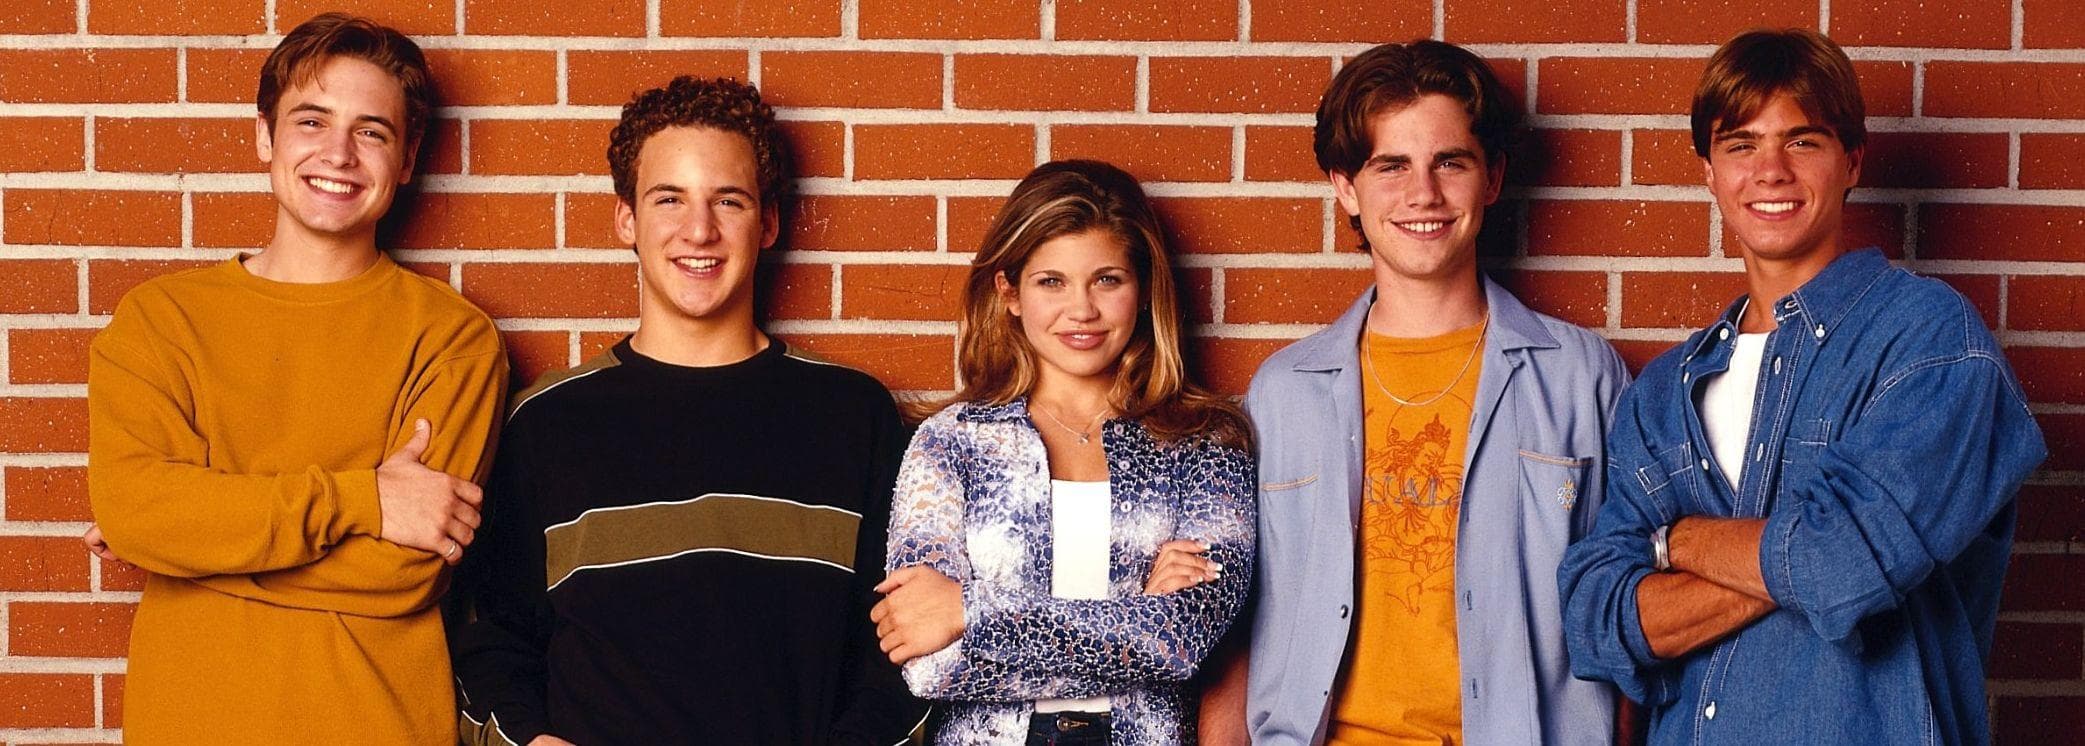 Download Topanga Bailing On Yale Is Just One Of The Many Mistakes Characters Made On Boy Meets World